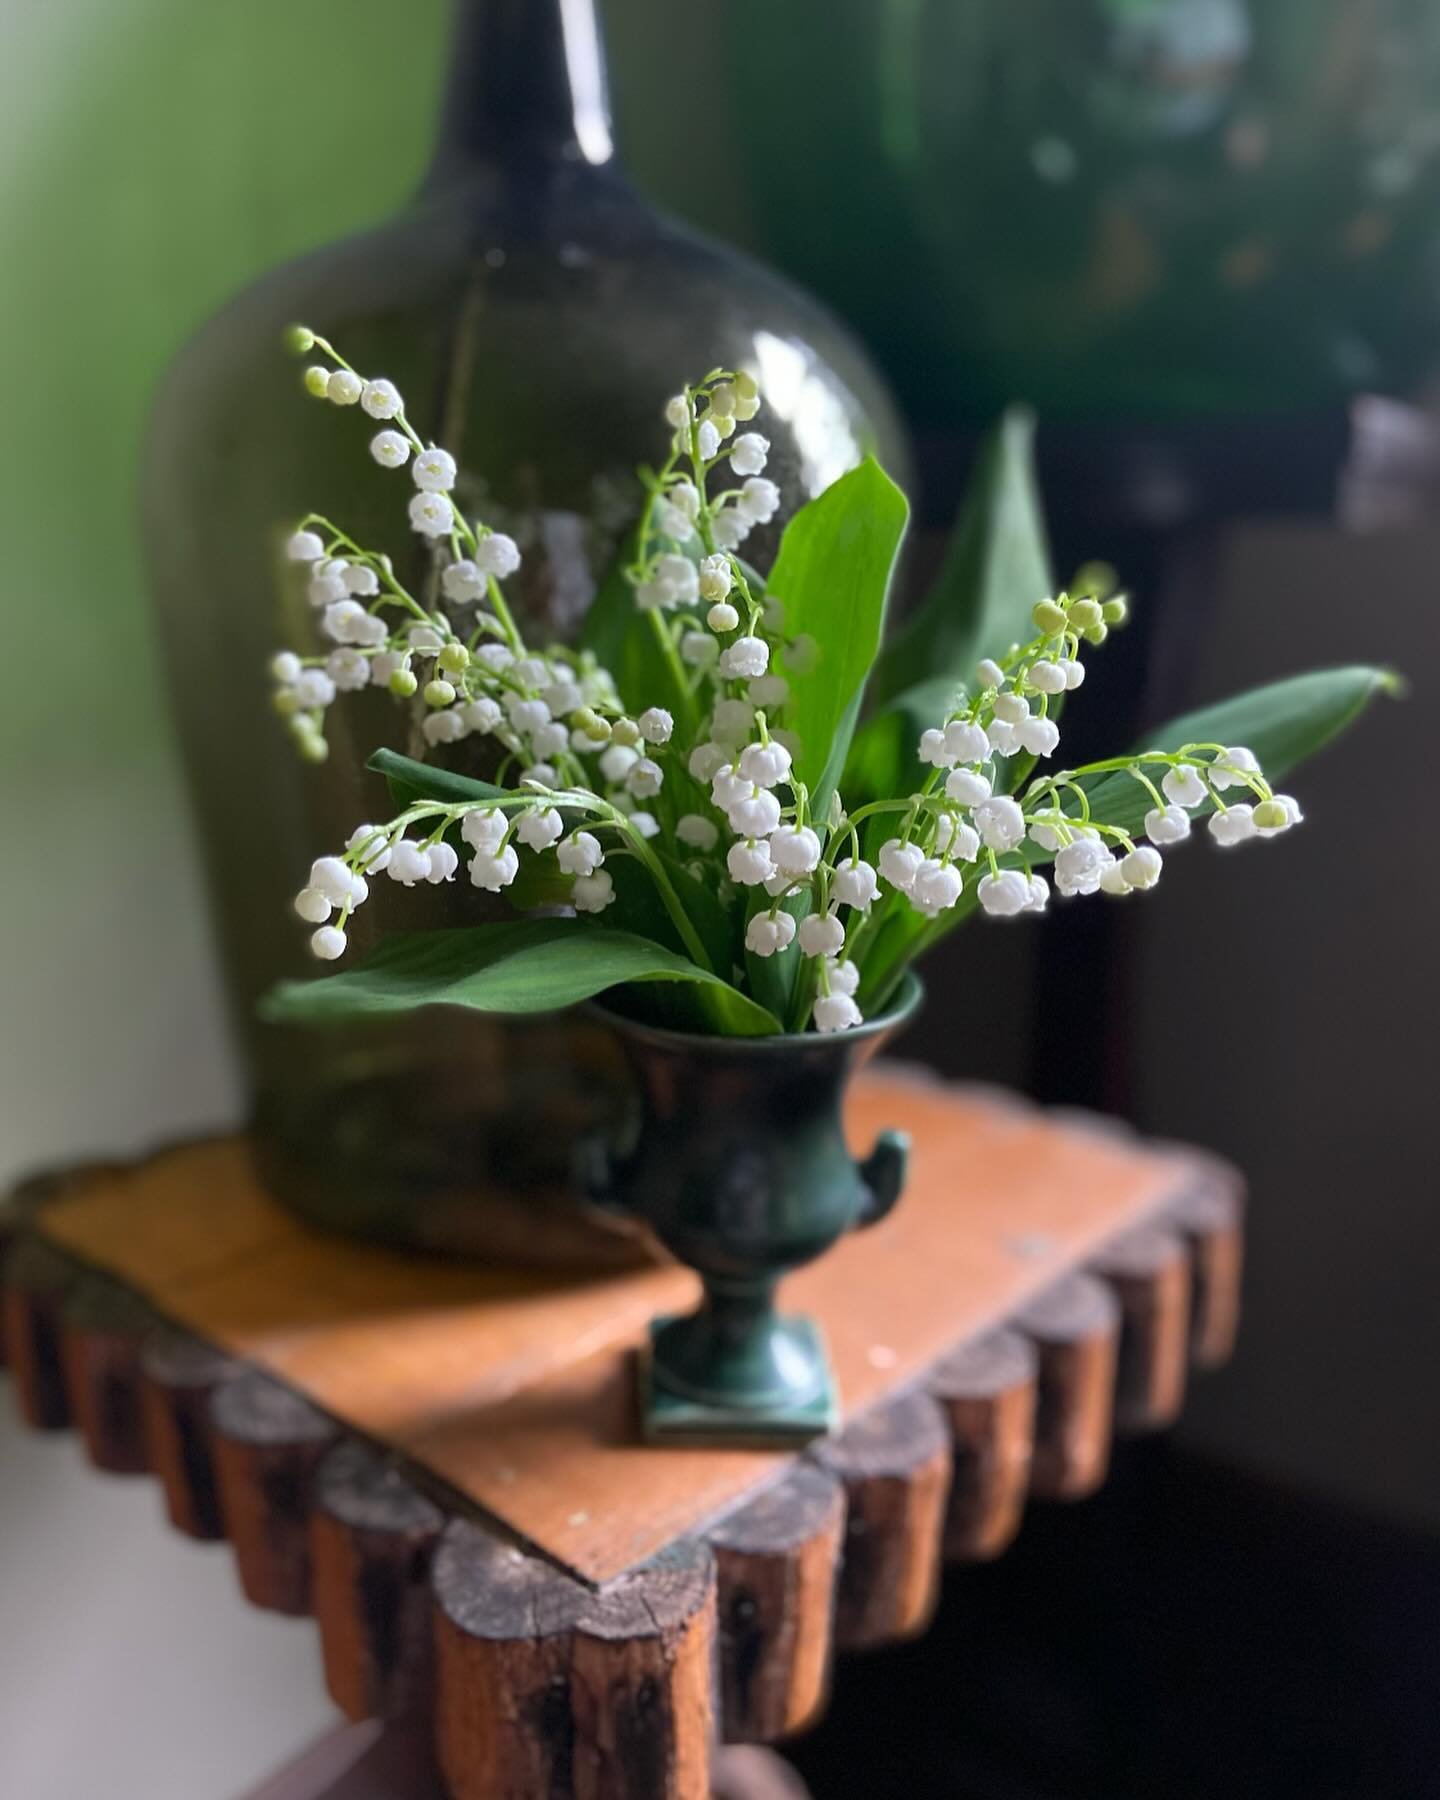 Lily of the Valley Day, a celebration steeped in rich history and delicate beauty.

Originating from ancient Roman mythology, where it symbolized the return of happiness, this enchanting bloom has captivated hearts for centuries.

Today, we honor its